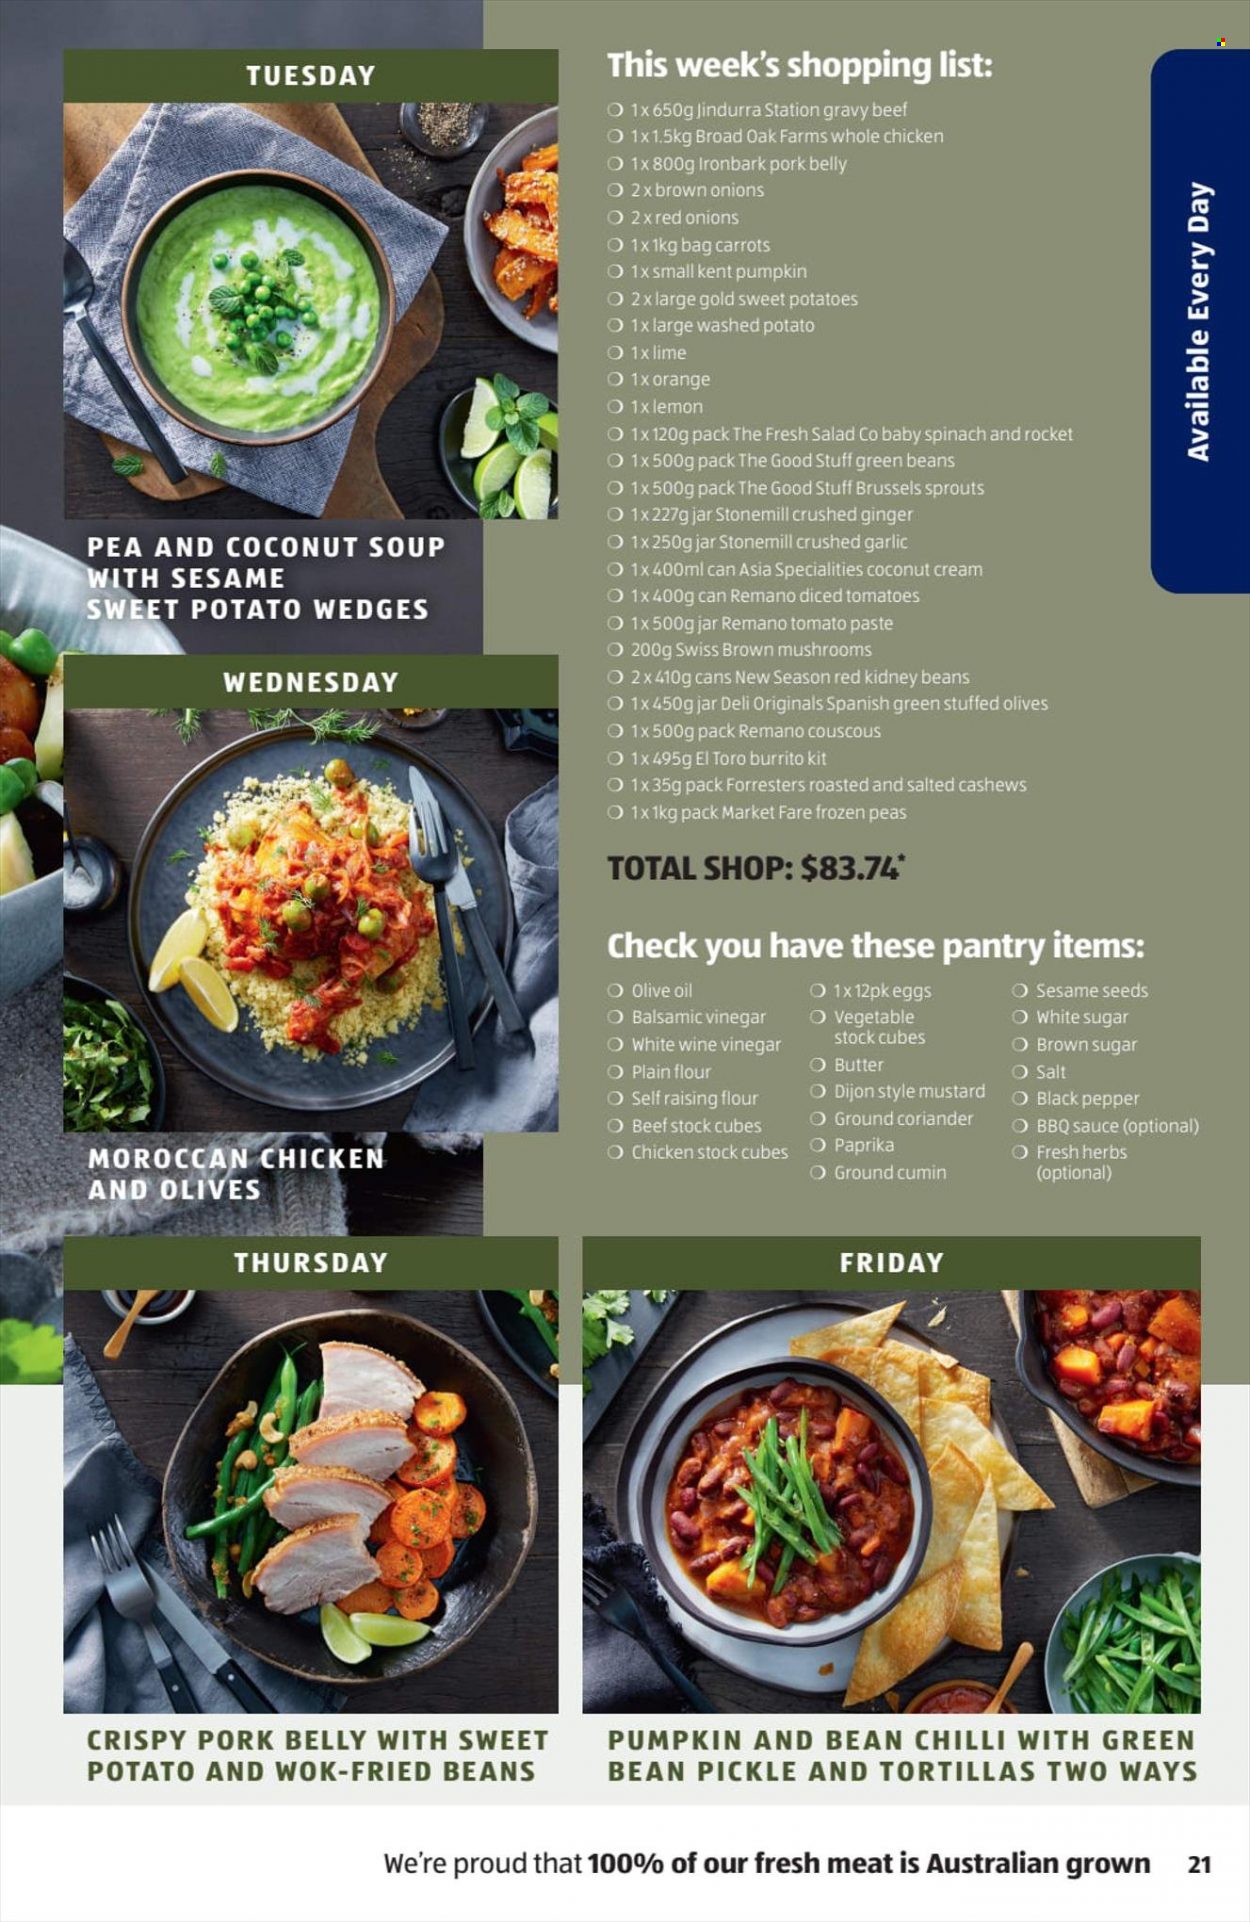 thumbnail - ALDI Catalogue - 29 Jun 2022 - 5 Jul 2022 - Sales products - mushrooms, beans, carrots, garlic, ginger, green beans, red onions, potatoes, peas, onion, salad, brussel sprouts, baby spinach, vegetable stock, sauce, burrito, eggs, butter, coconut cream, crispy pork, potato wedges, cane sugar, tomato paste, kidney beans, olives, diced tomatoes, couscous, black pepper, cumin, coriander, BBQ sauce, mustard, balsamic vinegar, vinegar, wine vinegar, olive oil, oil, cashews, whole chicken, pork belly, pork meat, wok, jar, plant seeds. Page 21.